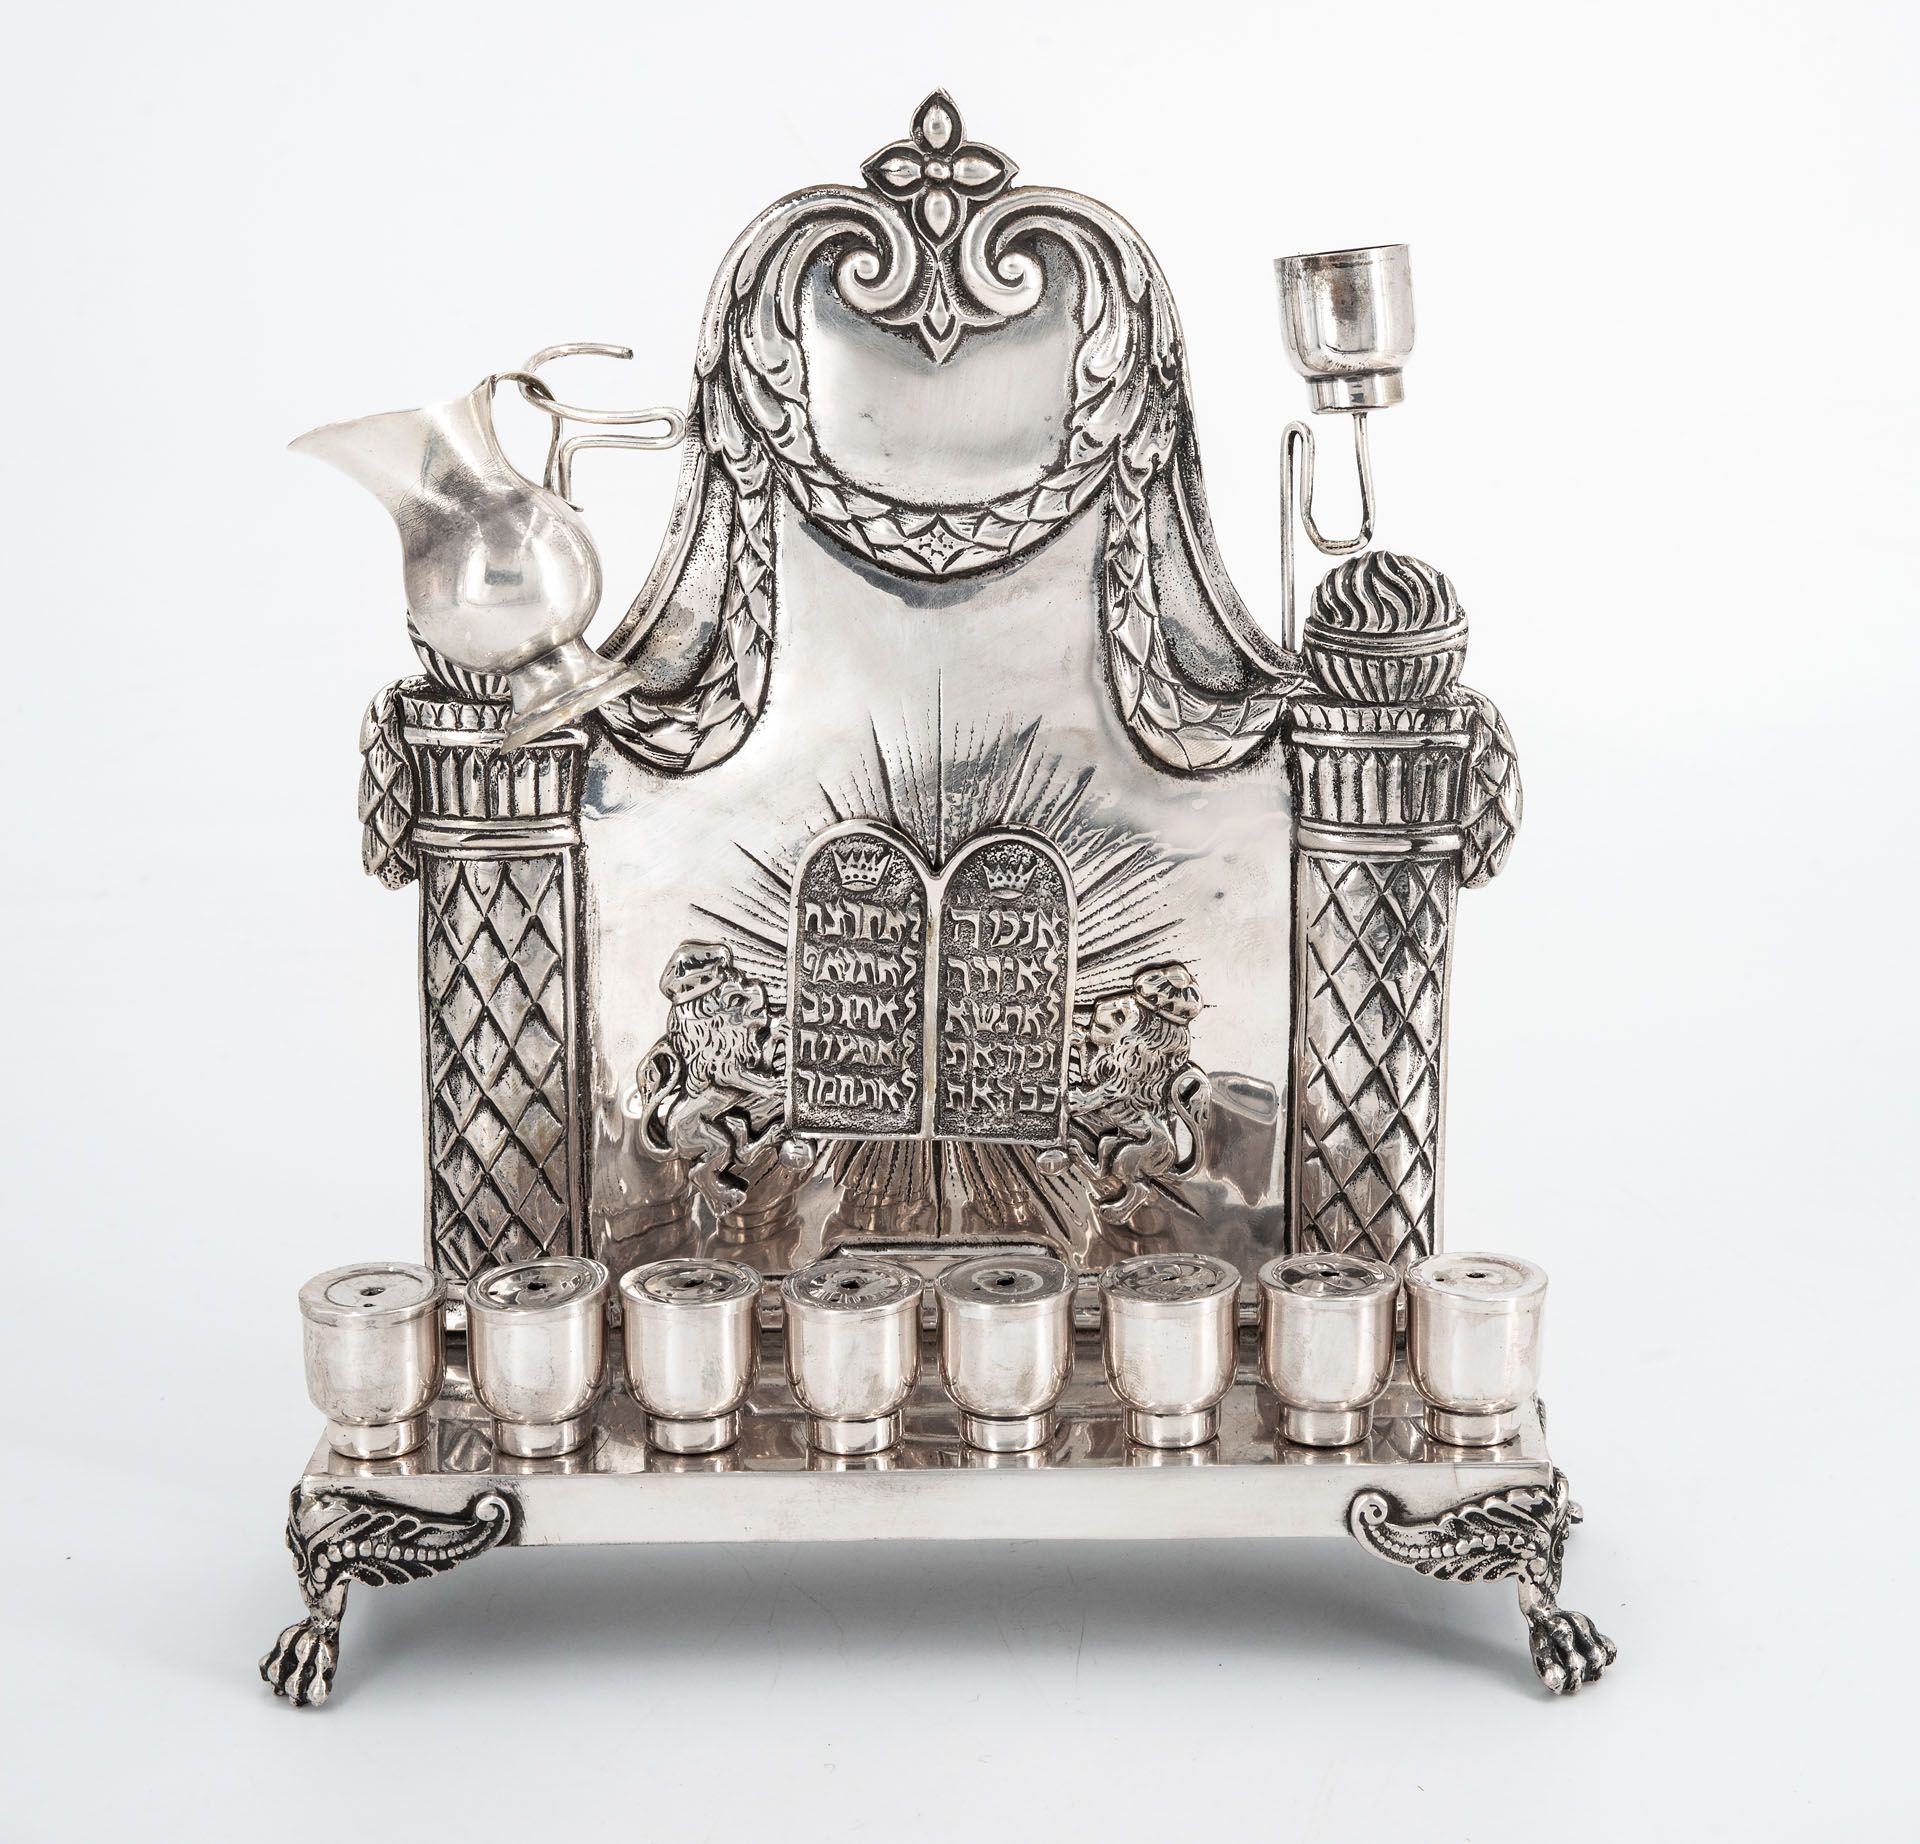 A Nice Silver Hanukkah Lamp, Germany, Early 20th Century - Image 2 of 3